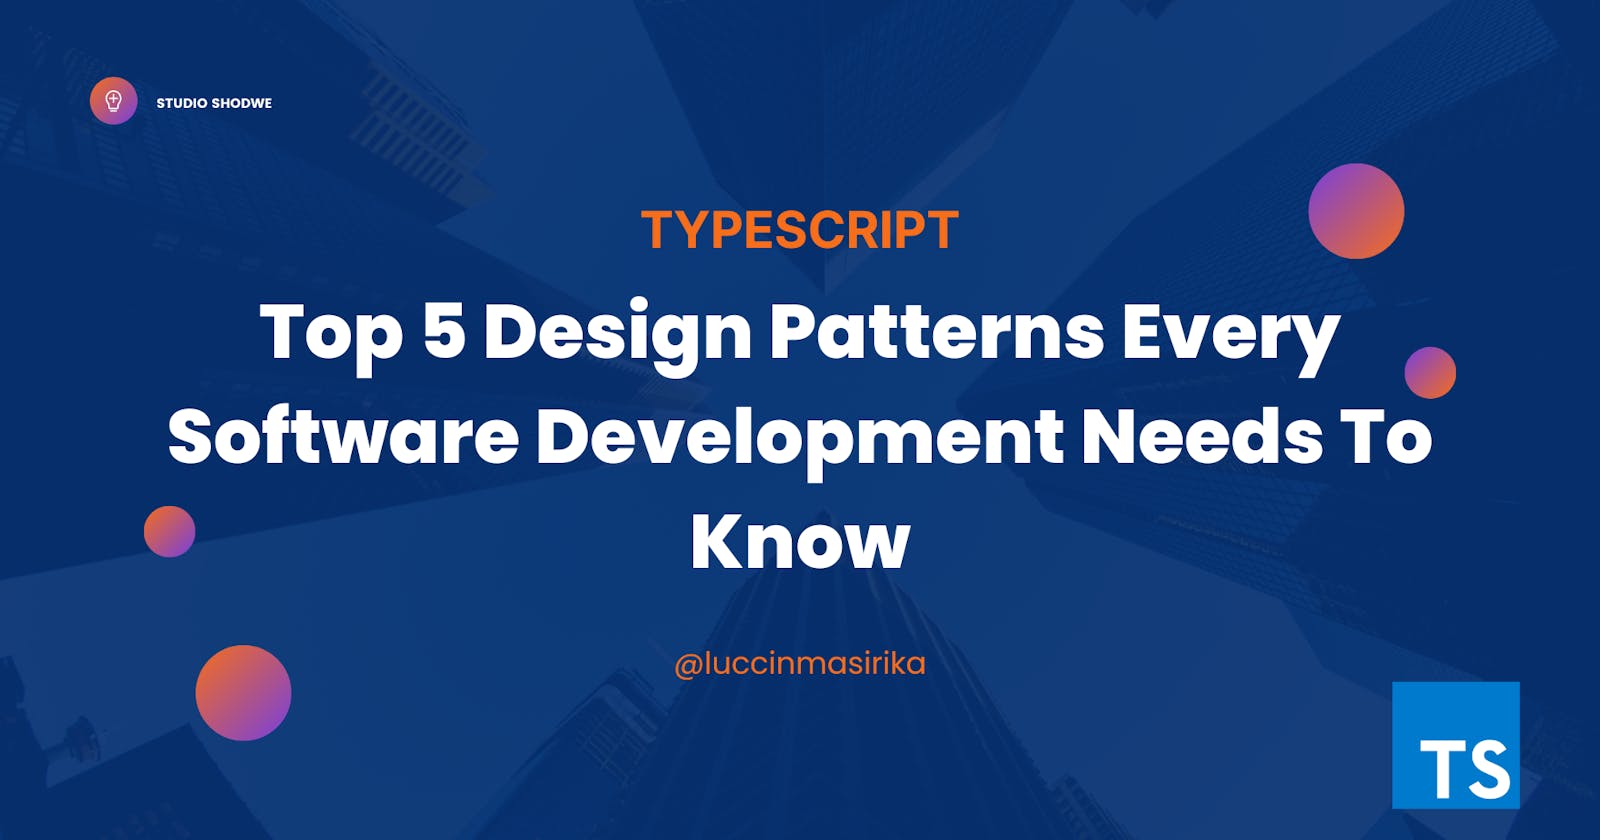 Top 5 Design Patterns Every Software Development Company Needs To Know